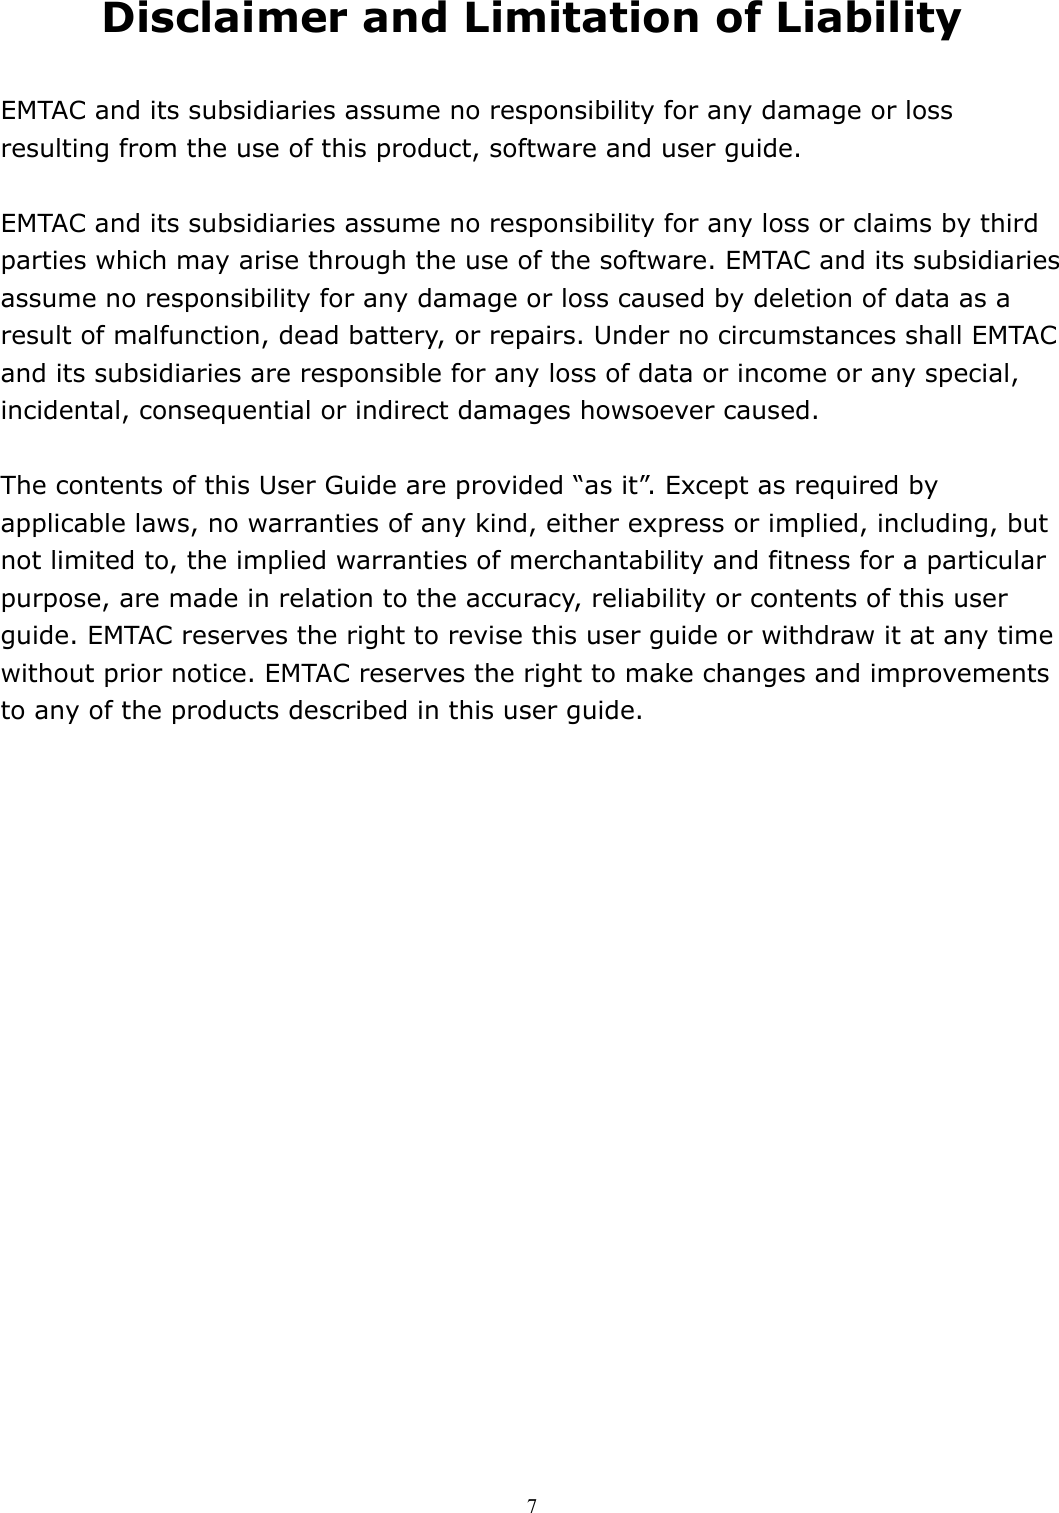  7 Disclaimer and Limitation of Liability  EMTAC and its subsidiaries assume no responsibility for any damage or loss resulting from the use of this product, software and user guide.  EMTAC and its subsidiaries assume no responsibility for any loss or claims by third parties which may arise through the use of the software. EMTAC and its subsidiaries assume no responsibility for any damage or loss caused by deletion of data as a result of malfunction, dead battery, or repairs. Under no circumstances shall EMTAC and its subsidiaries are responsible for any loss of data or income or any special, incidental, consequential or indirect damages howsoever caused.  The contents of this User Guide are provided “as it”. Except as required by applicable laws, no warranties of any kind, either express or implied, including, but not limited to, the implied warranties of merchantability and fitness for a particular purpose, are made in relation to the accuracy, reliability or contents of this user guide. EMTAC reserves the right to revise this user guide or withdraw it at any time without prior notice. EMTAC reserves the right to make changes and improvements to any of the products described in this user guide.  